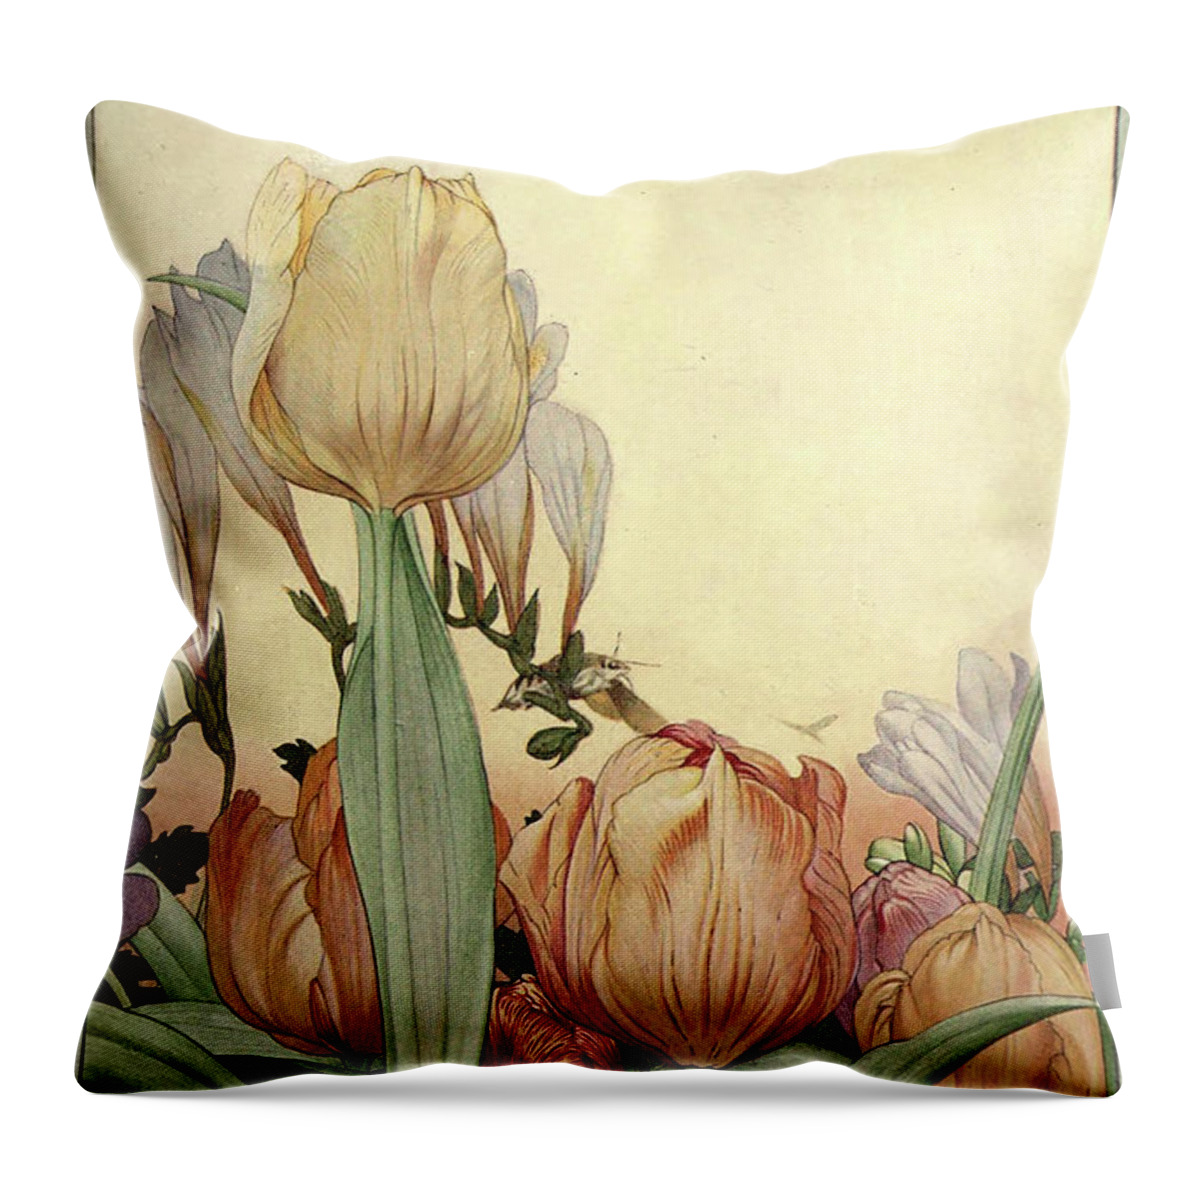 Botanical & Floral+flowers+other Throw Pillow featuring the painting Garden Fantasy I by Unknown